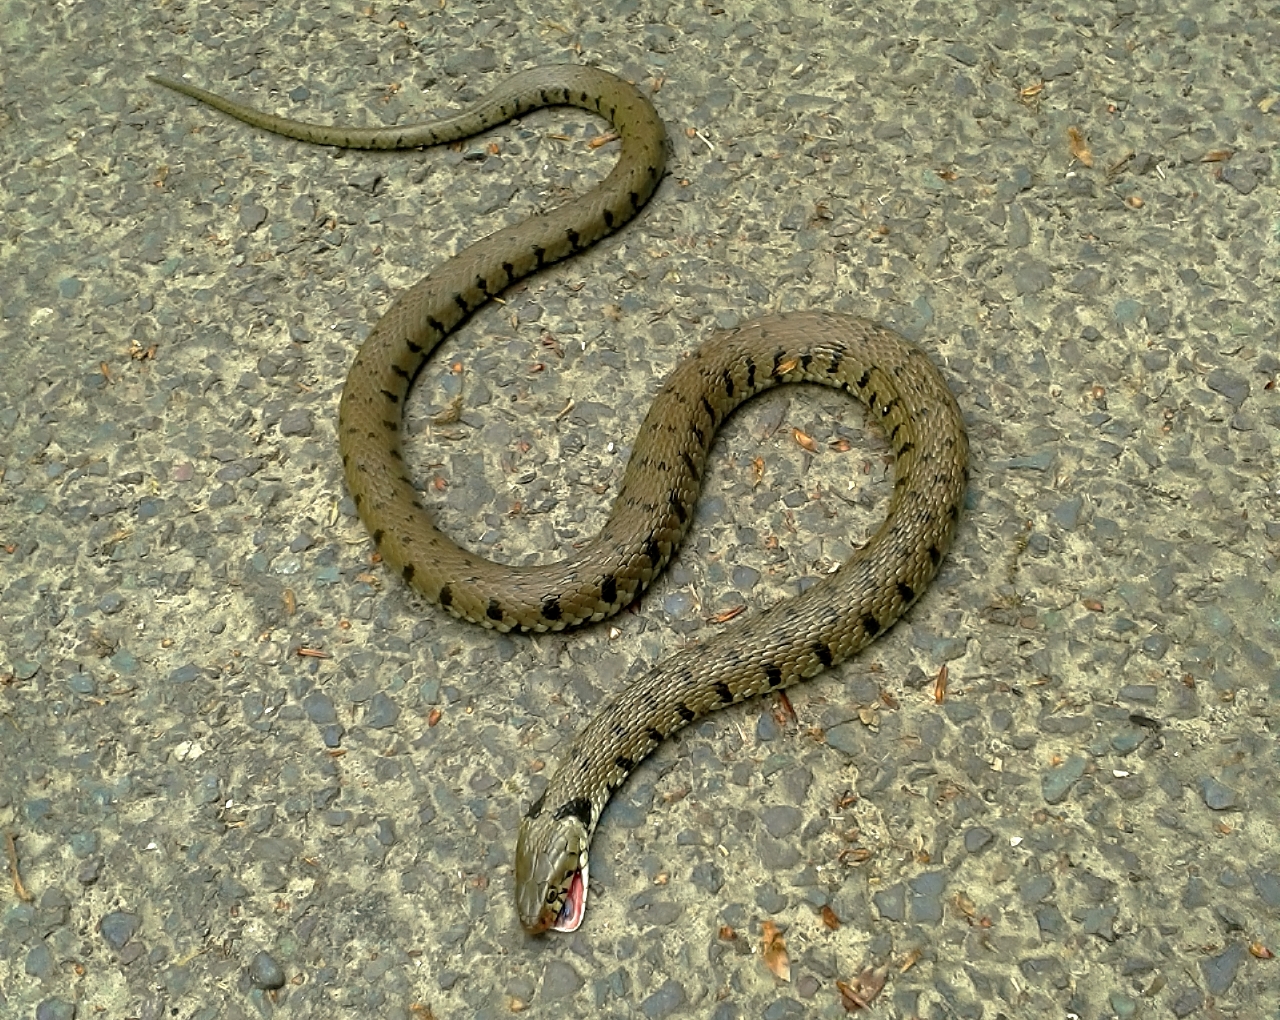 Grass snake, picture taken by my wife on her mobile phone.